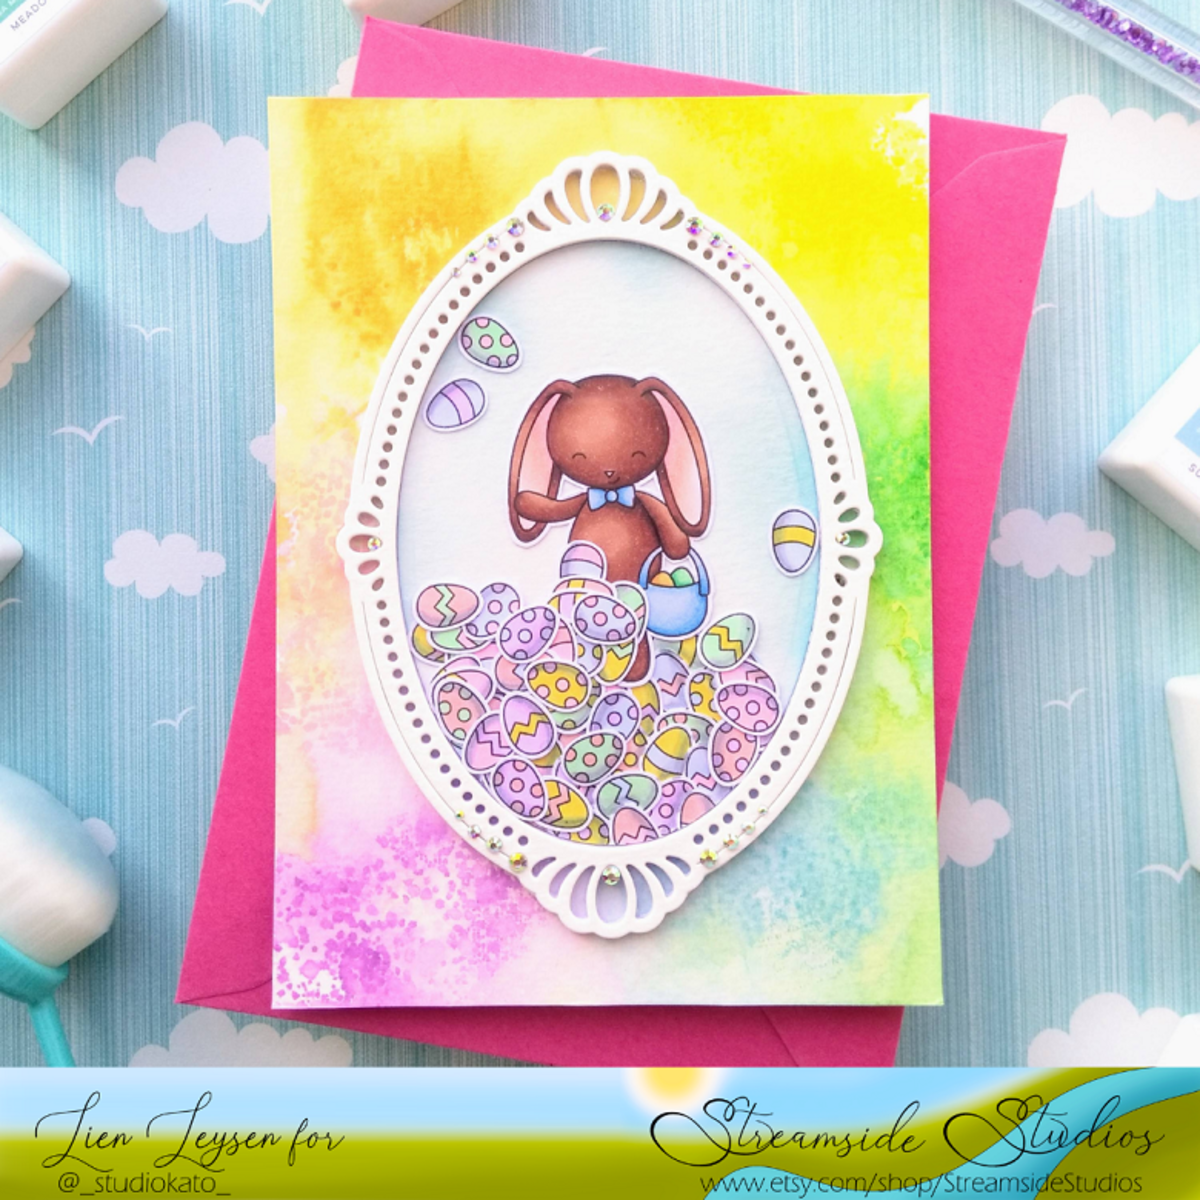 You can use digital stamps to make colorful cards